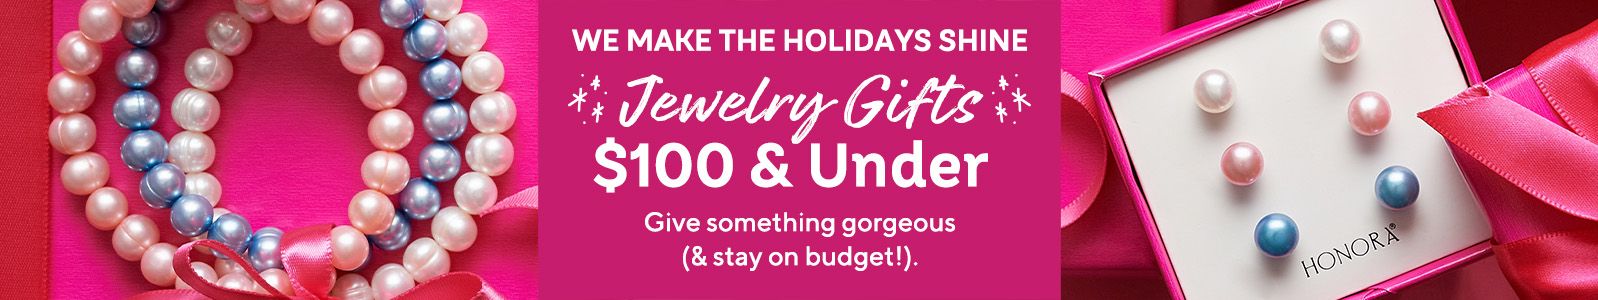 We Make the Holidays Shine. Jewelry Gifts $100 & Under. Give something gorgeous (& stay on budget!).